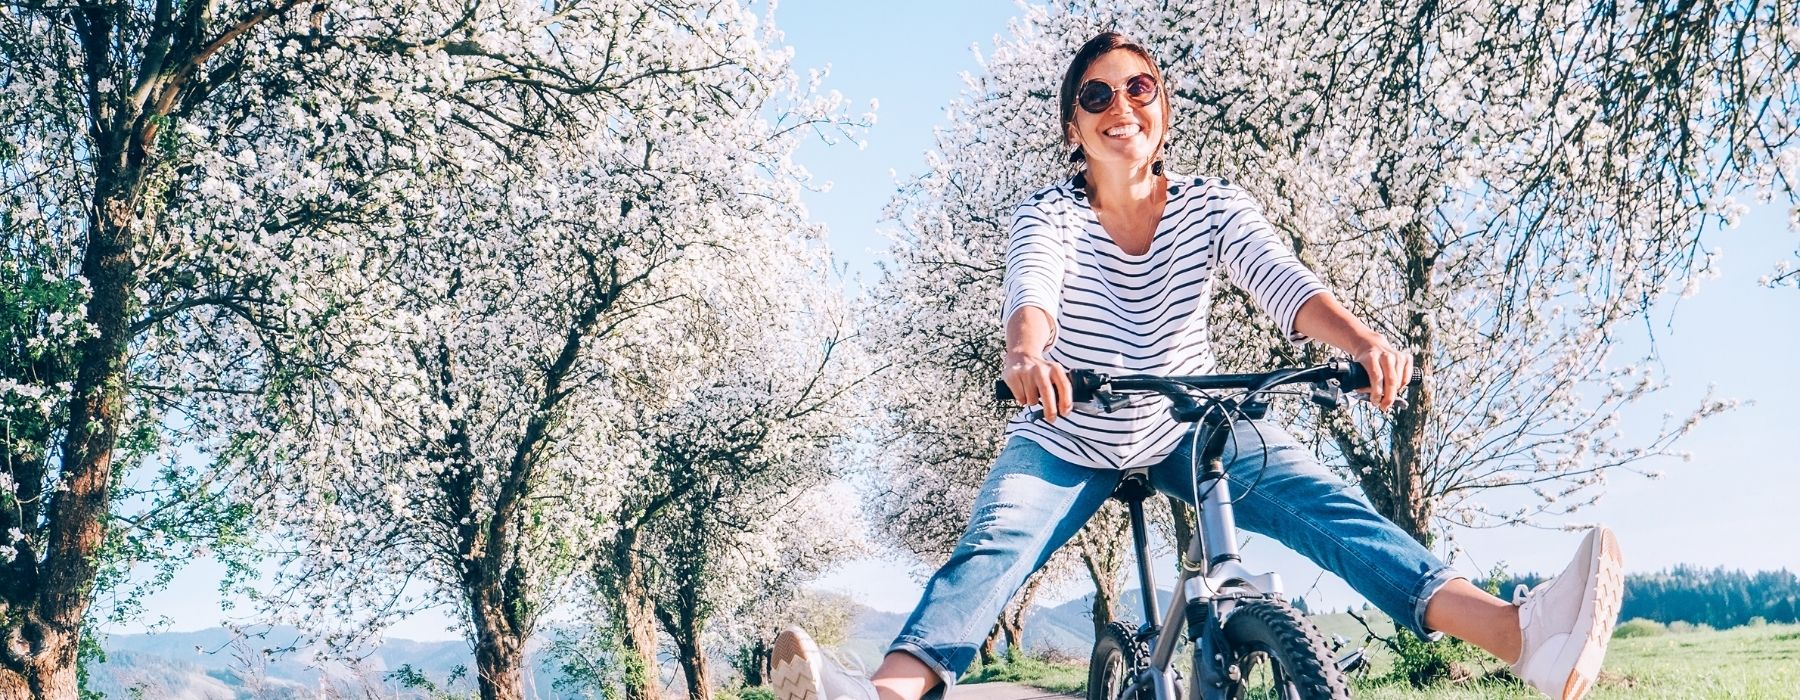 10 Ways to "Spring Clean" Your Mind, Body and Soul